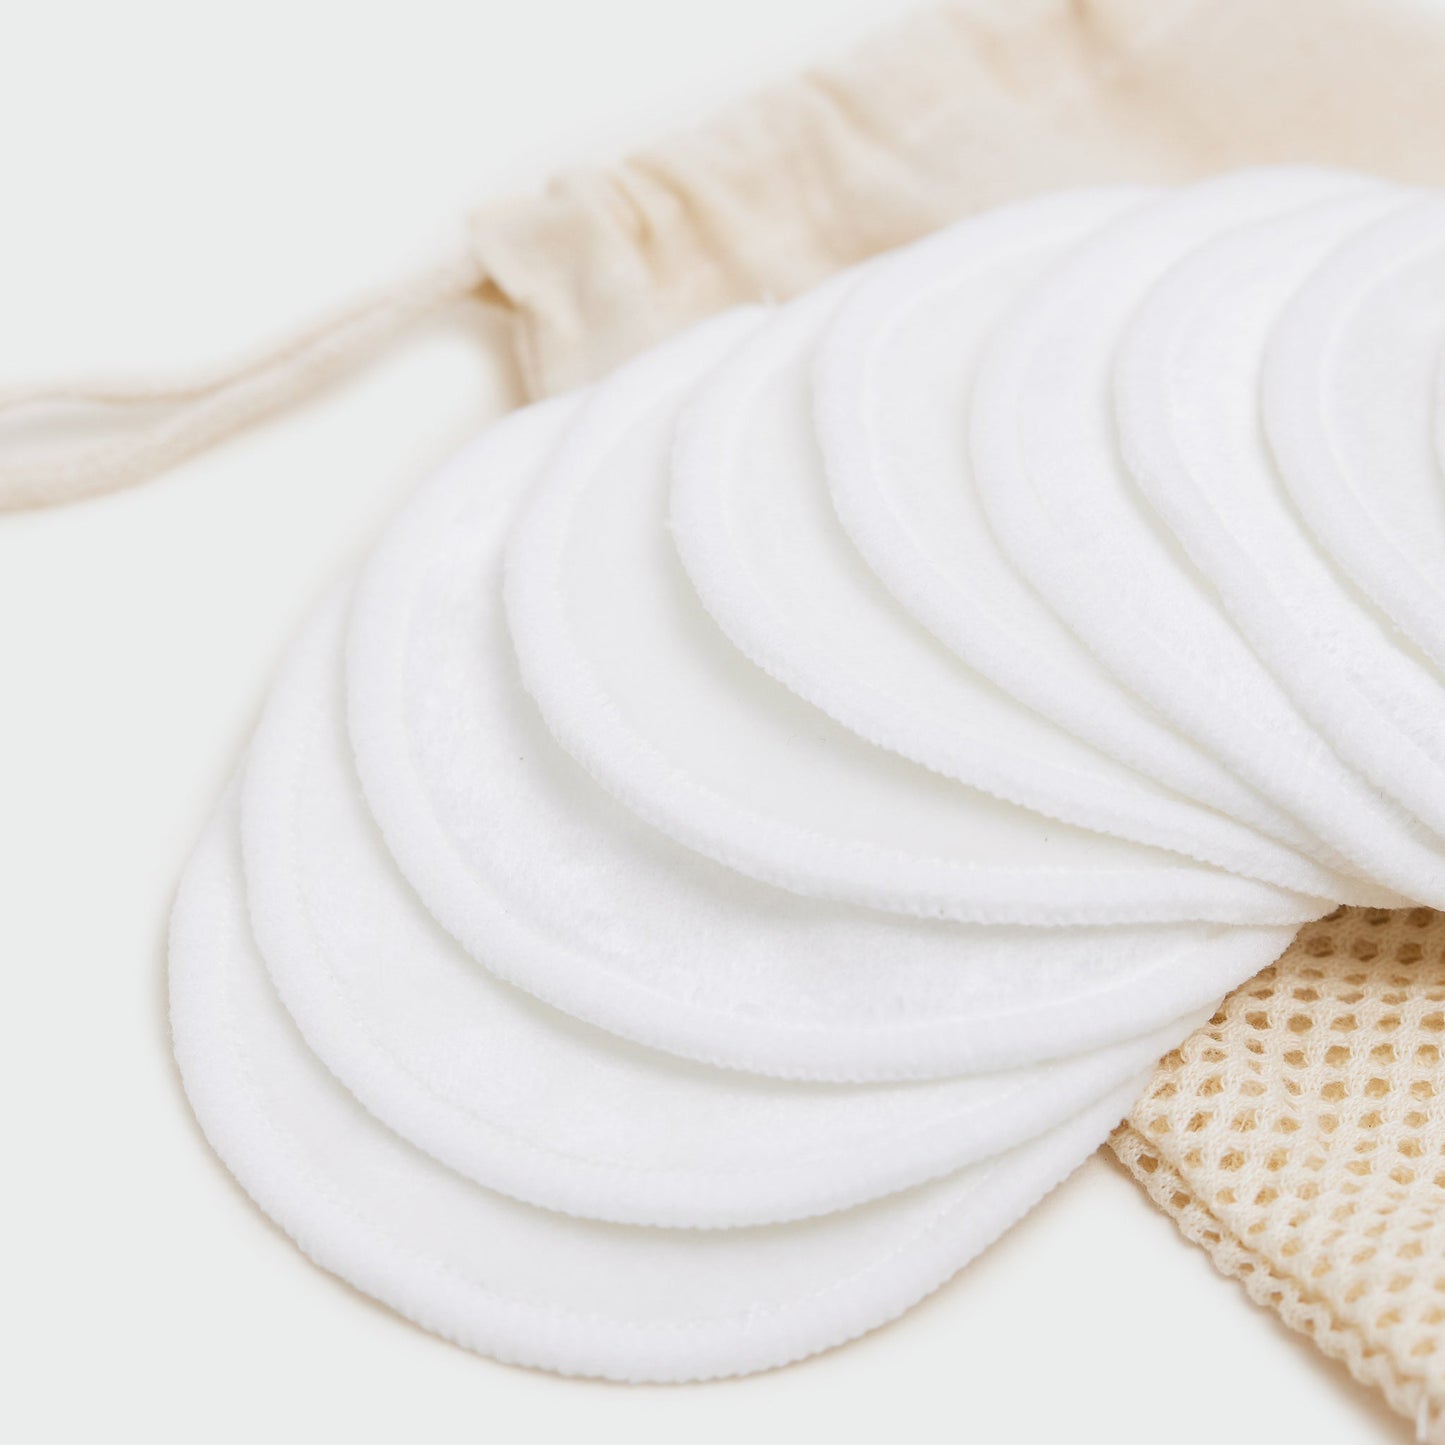 Reusable Skincare Pads by Clean Circle